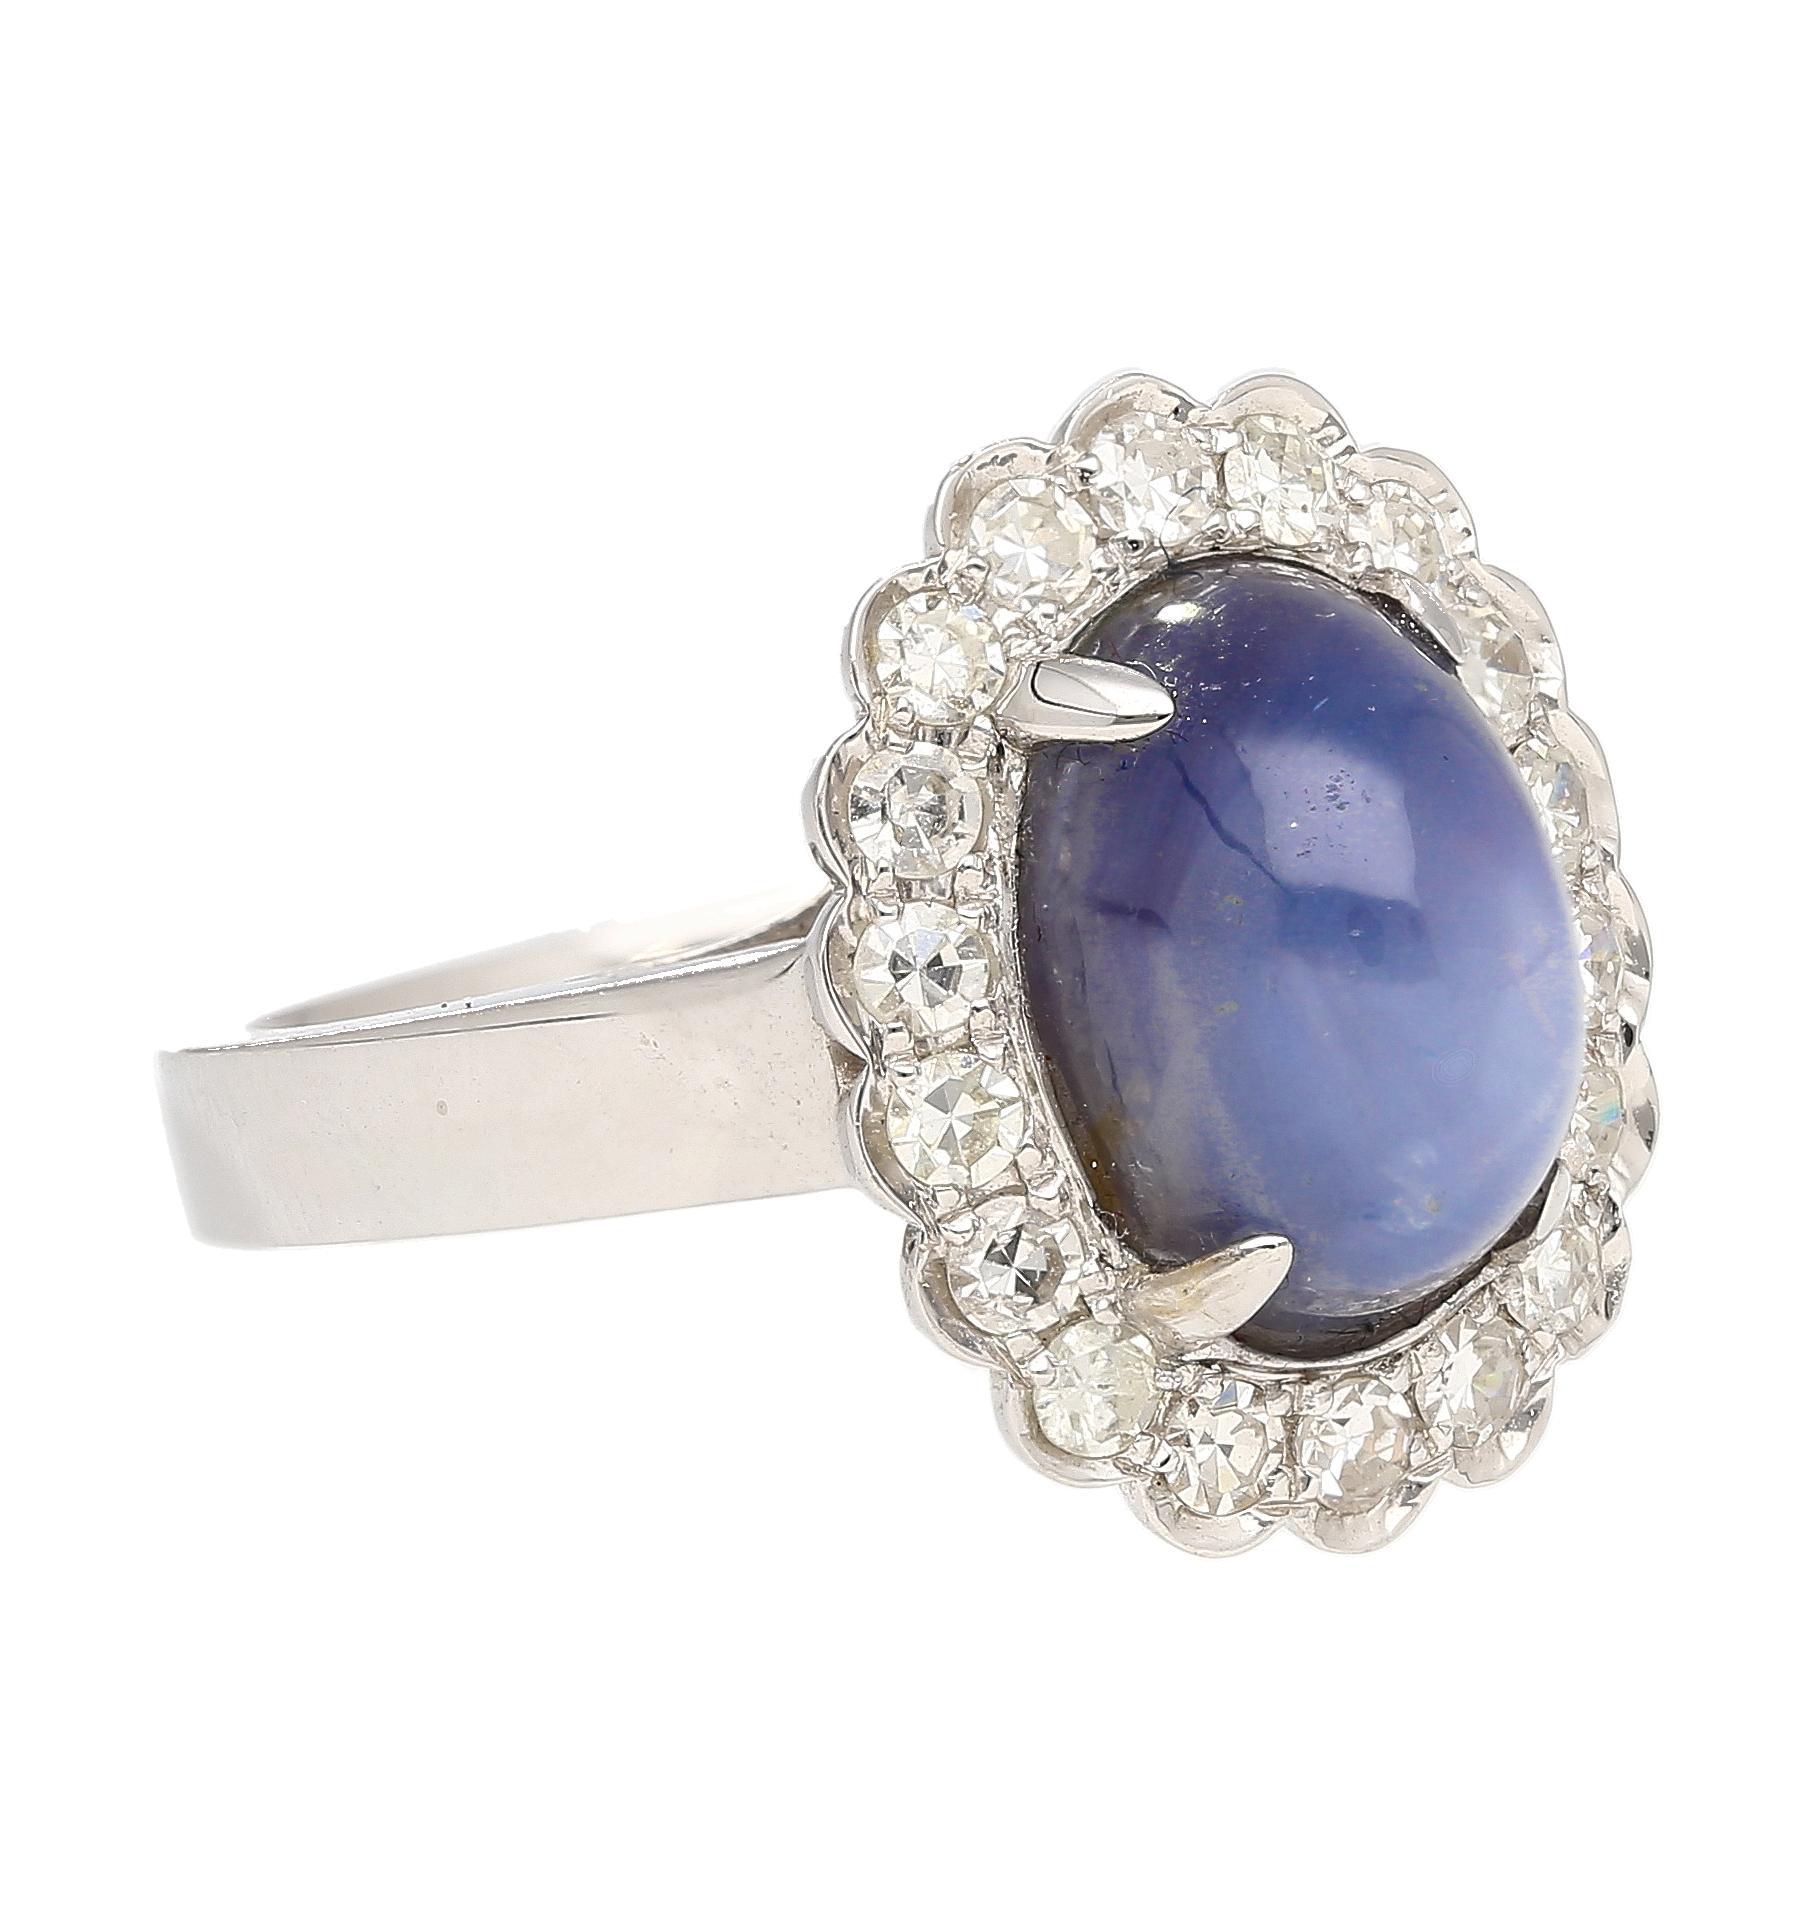 Contemporary 9.07 Carat Blue Star Sapphire & Diamond Halo Ring in 18K White Gold For Sale